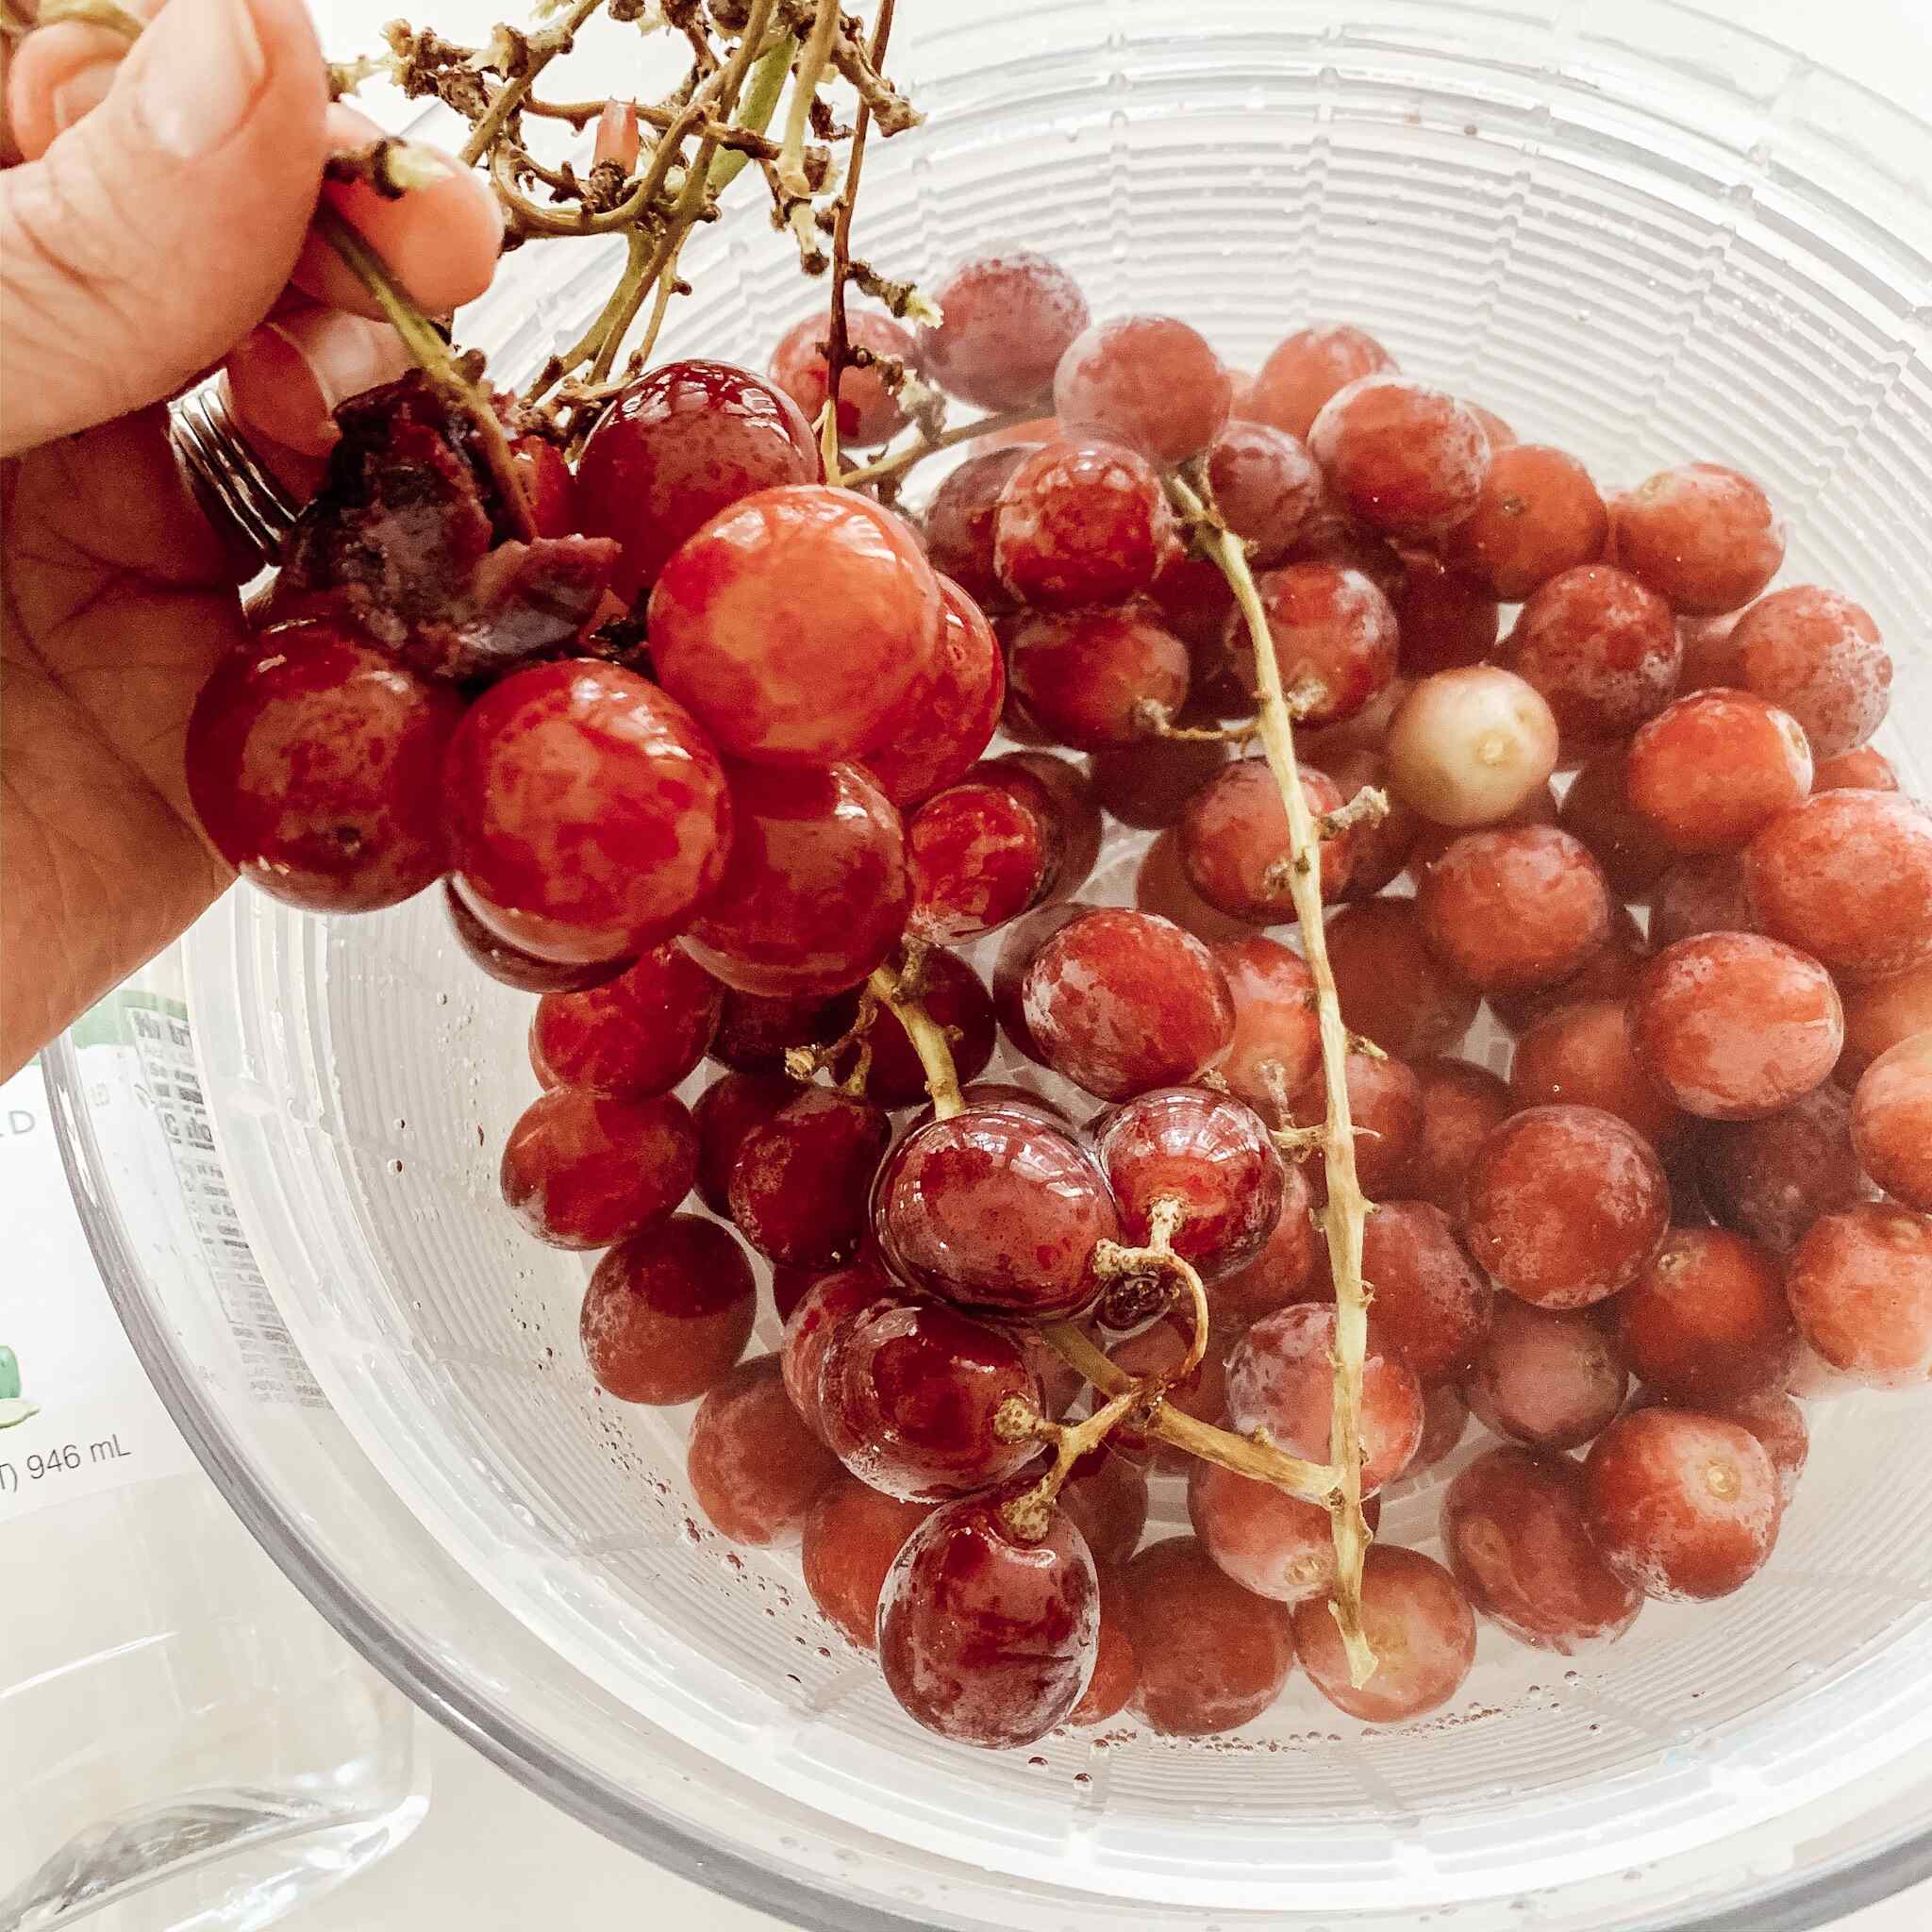 How To Store Grapes In Fridge After Washing